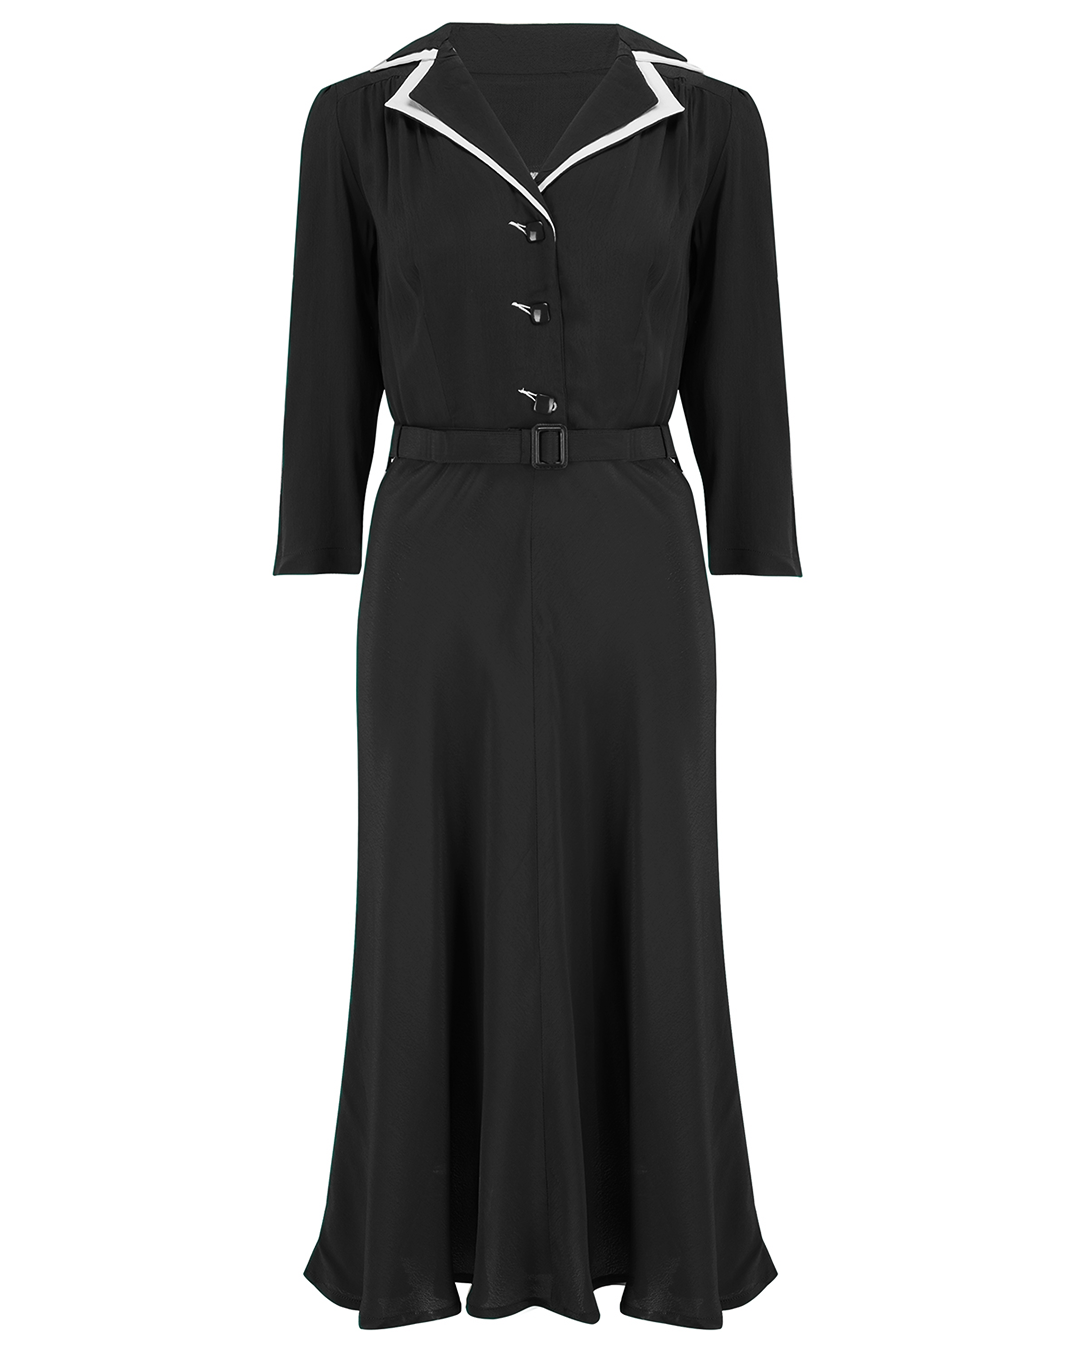 Long sleeve Lisa - Mae Dress in Black with contrast under collar, Authentic 1940s Vintage Style at its Best - True and authentic vintage style clothing, inspired by the Classic styles of CC41 , WW2 and the fun 1950s RocknRoll era, for everyday wear plus events like Goodwood Revival, Twinwood Festival and Viva Las Vegas Rockabilly Weekend Rock n Romance The Seamstress Of Bloomsbury